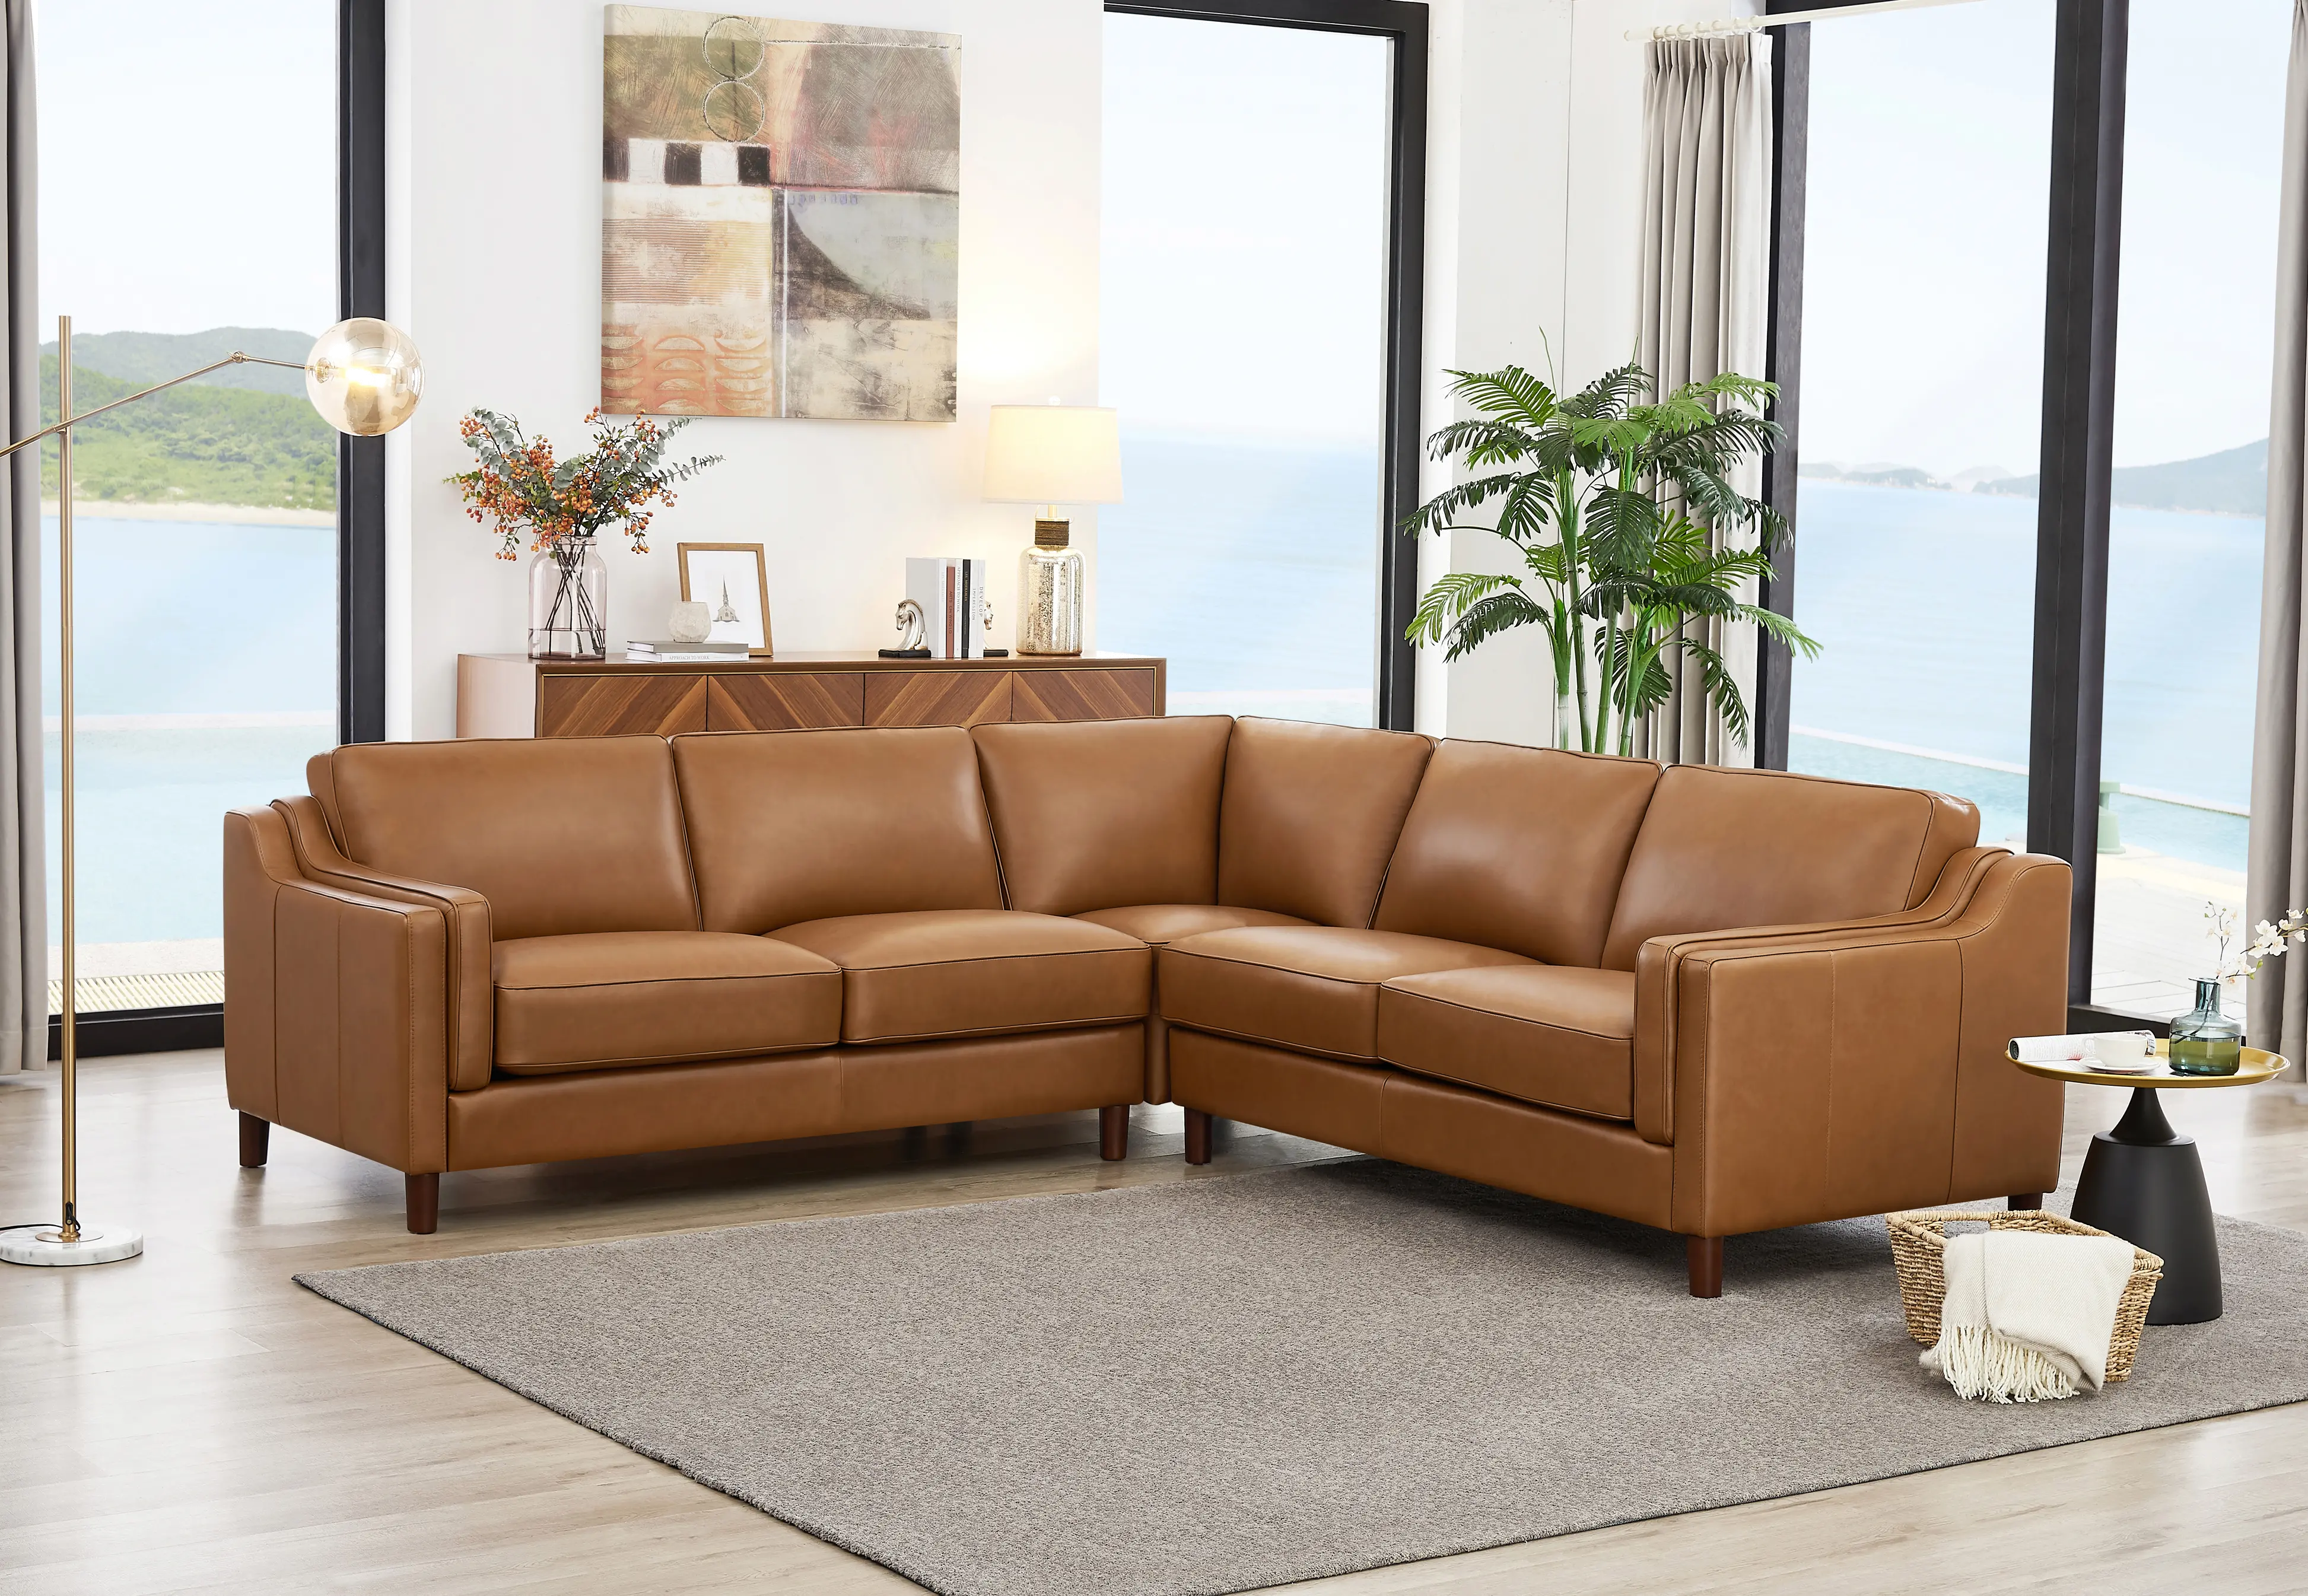 Ballari Cognac Brown Leather 3 Piece Sectional - Amax Leather